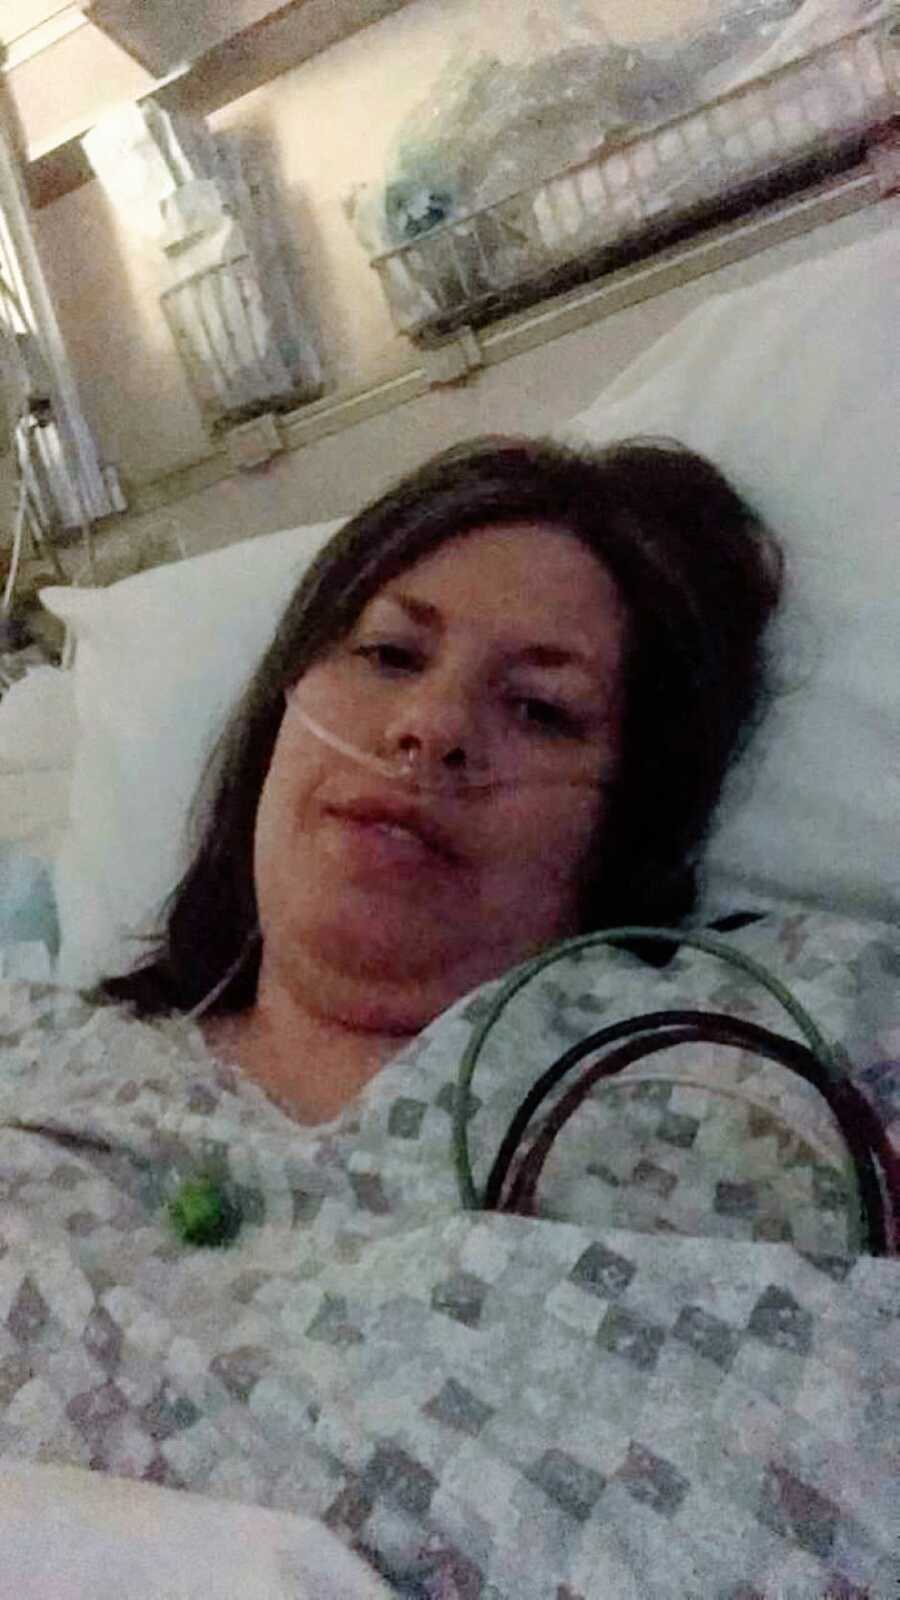 Mom battling stage 4 colon cancer takes a photo while in the hospital